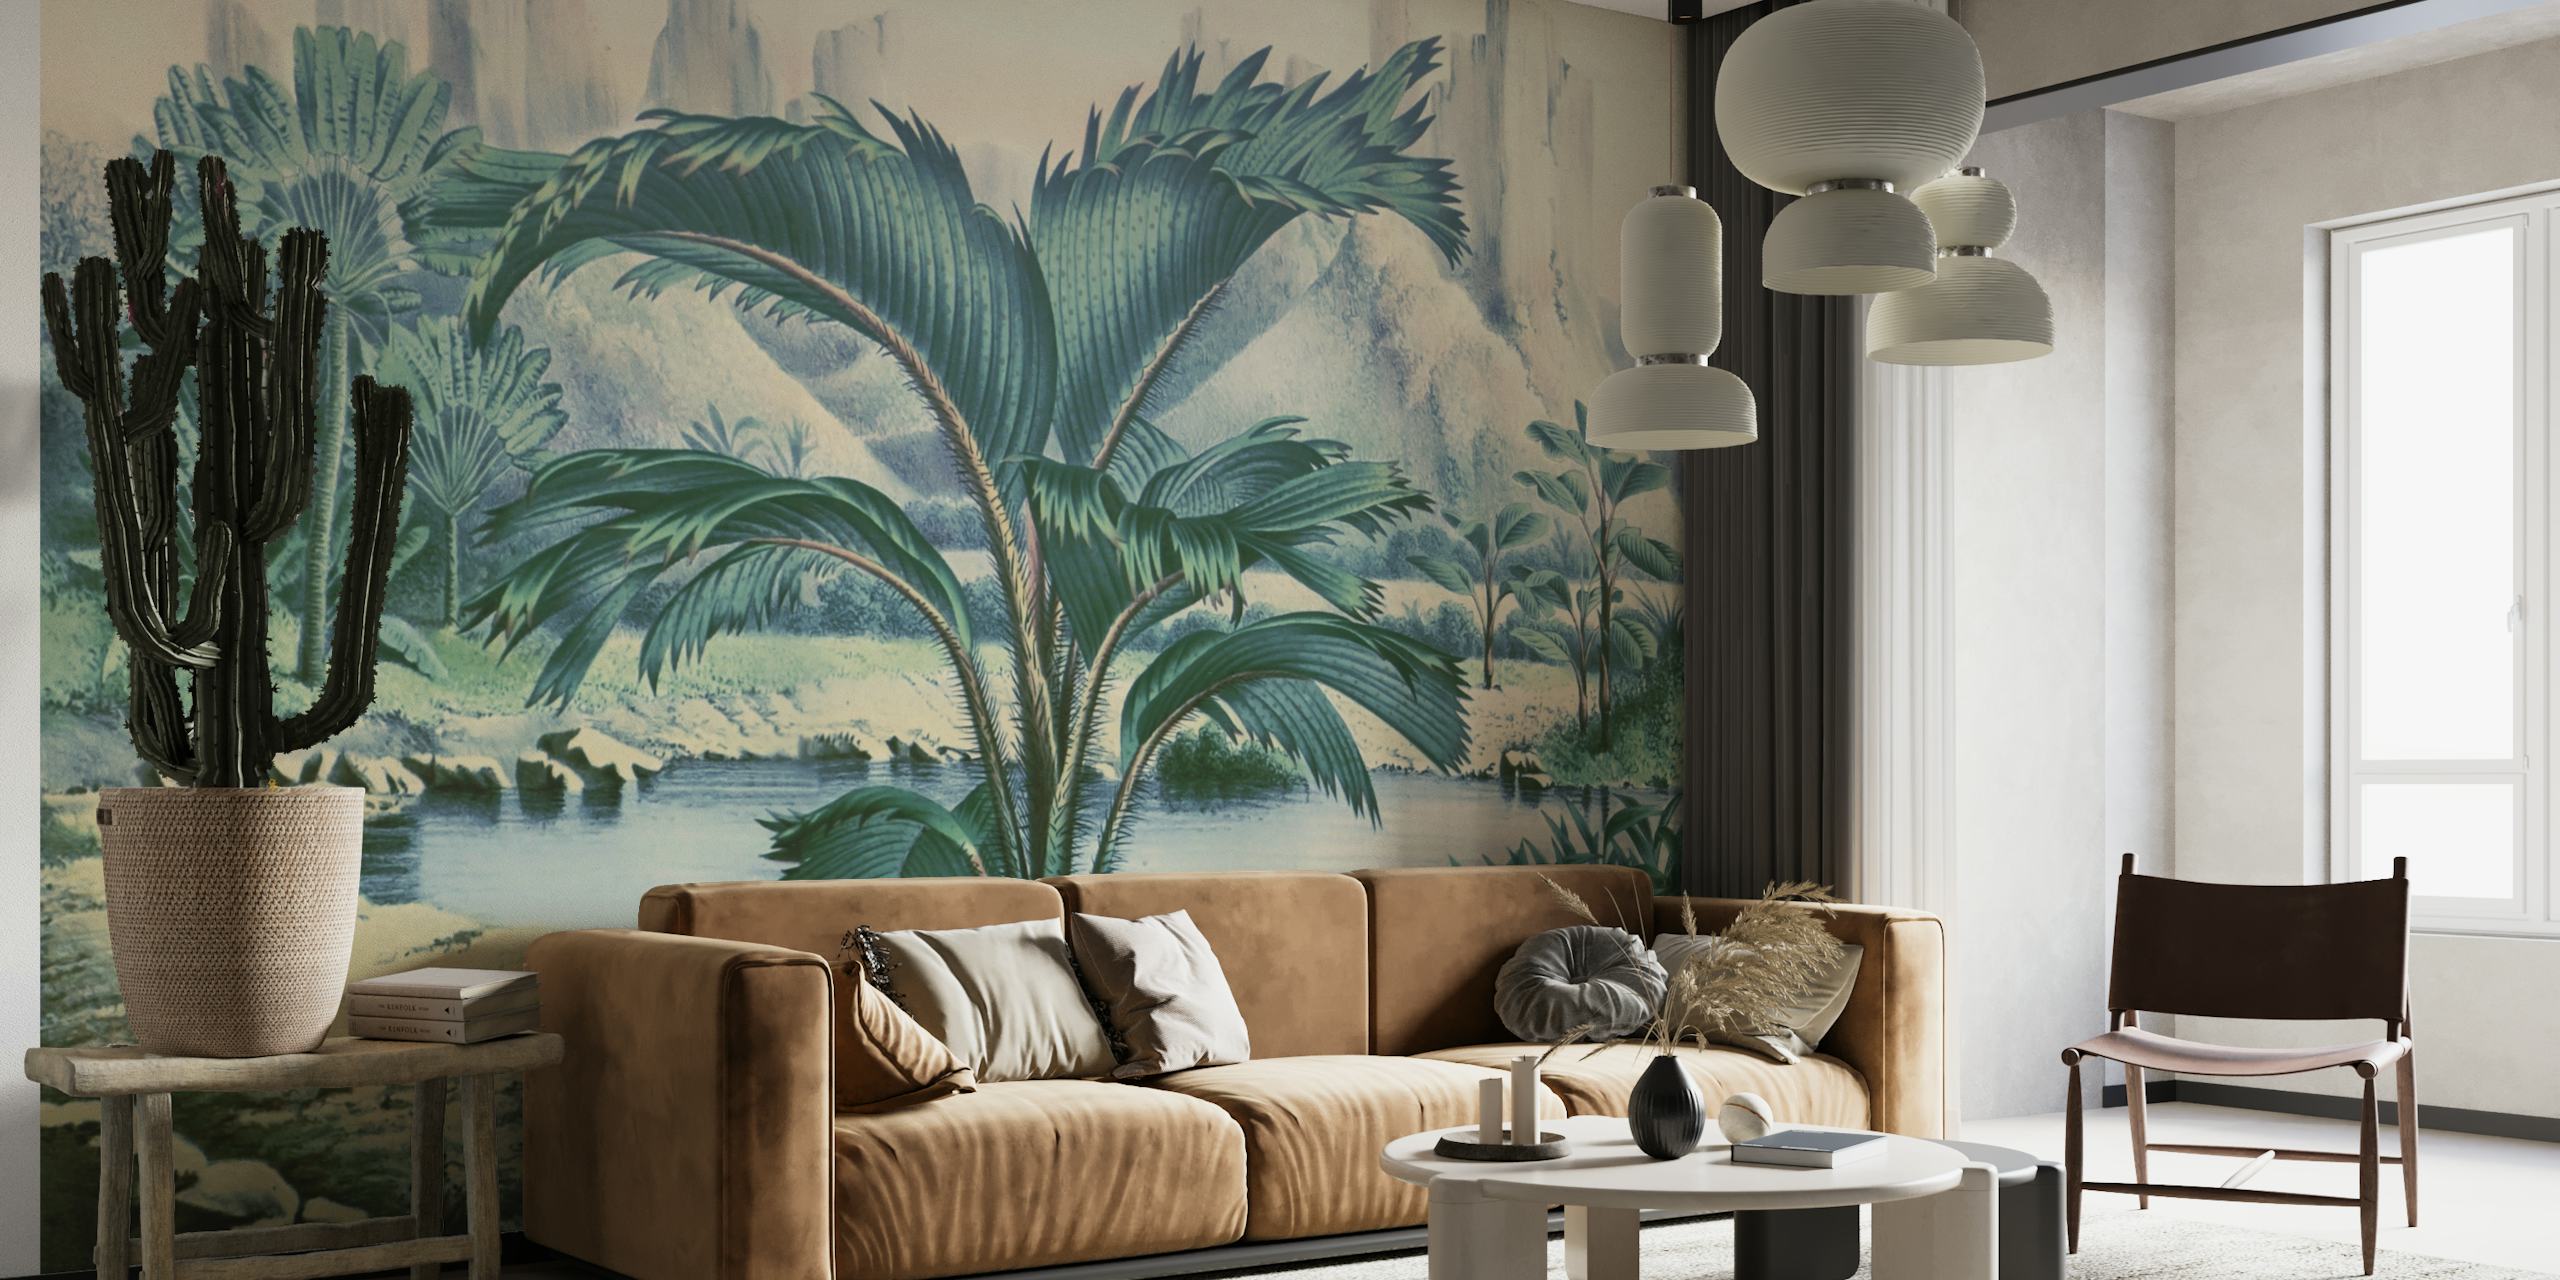 Tropical Scenery With Palm papel pintado